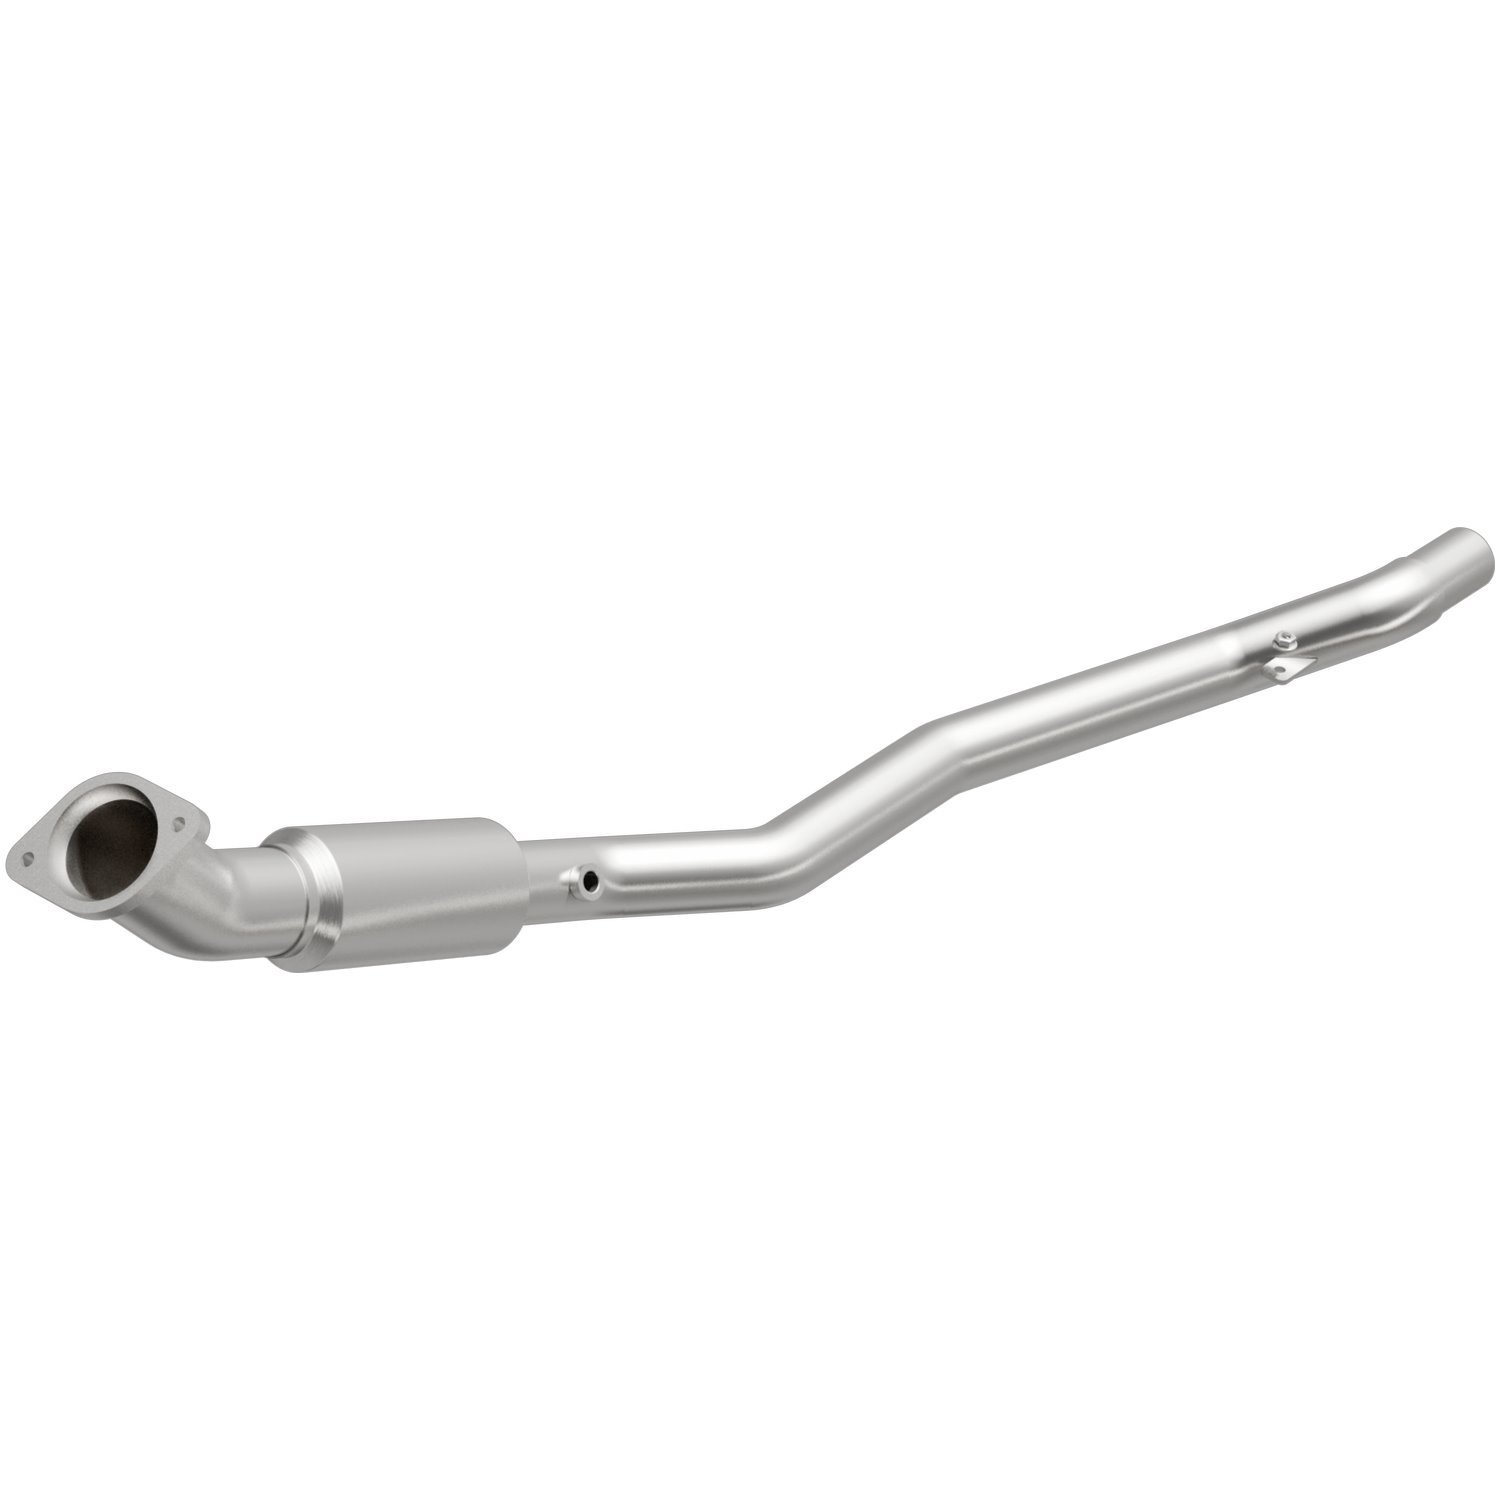 OEM Grade Federal / EPA Compliant Direct-Fit Catalytic Converter 21-539